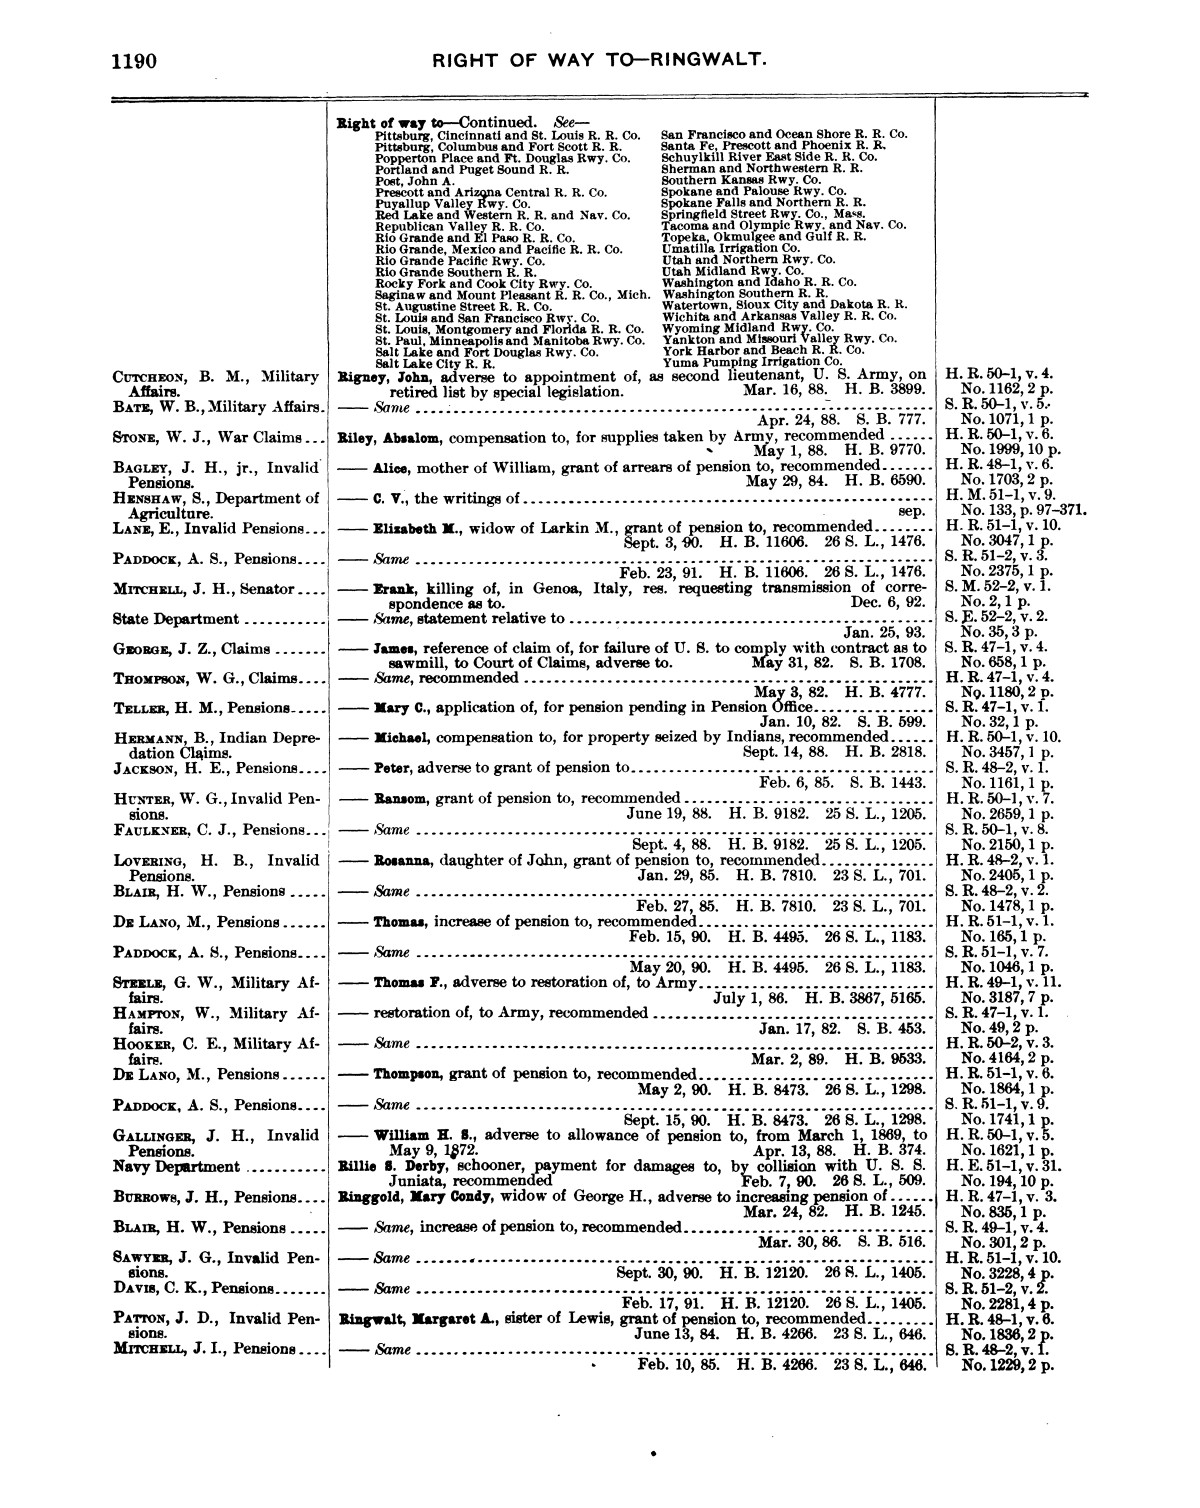 Comprehensive Index to the Publications of the United States Government, 1881-1893, Volume 2.
                                                
                                                    1190
                                                